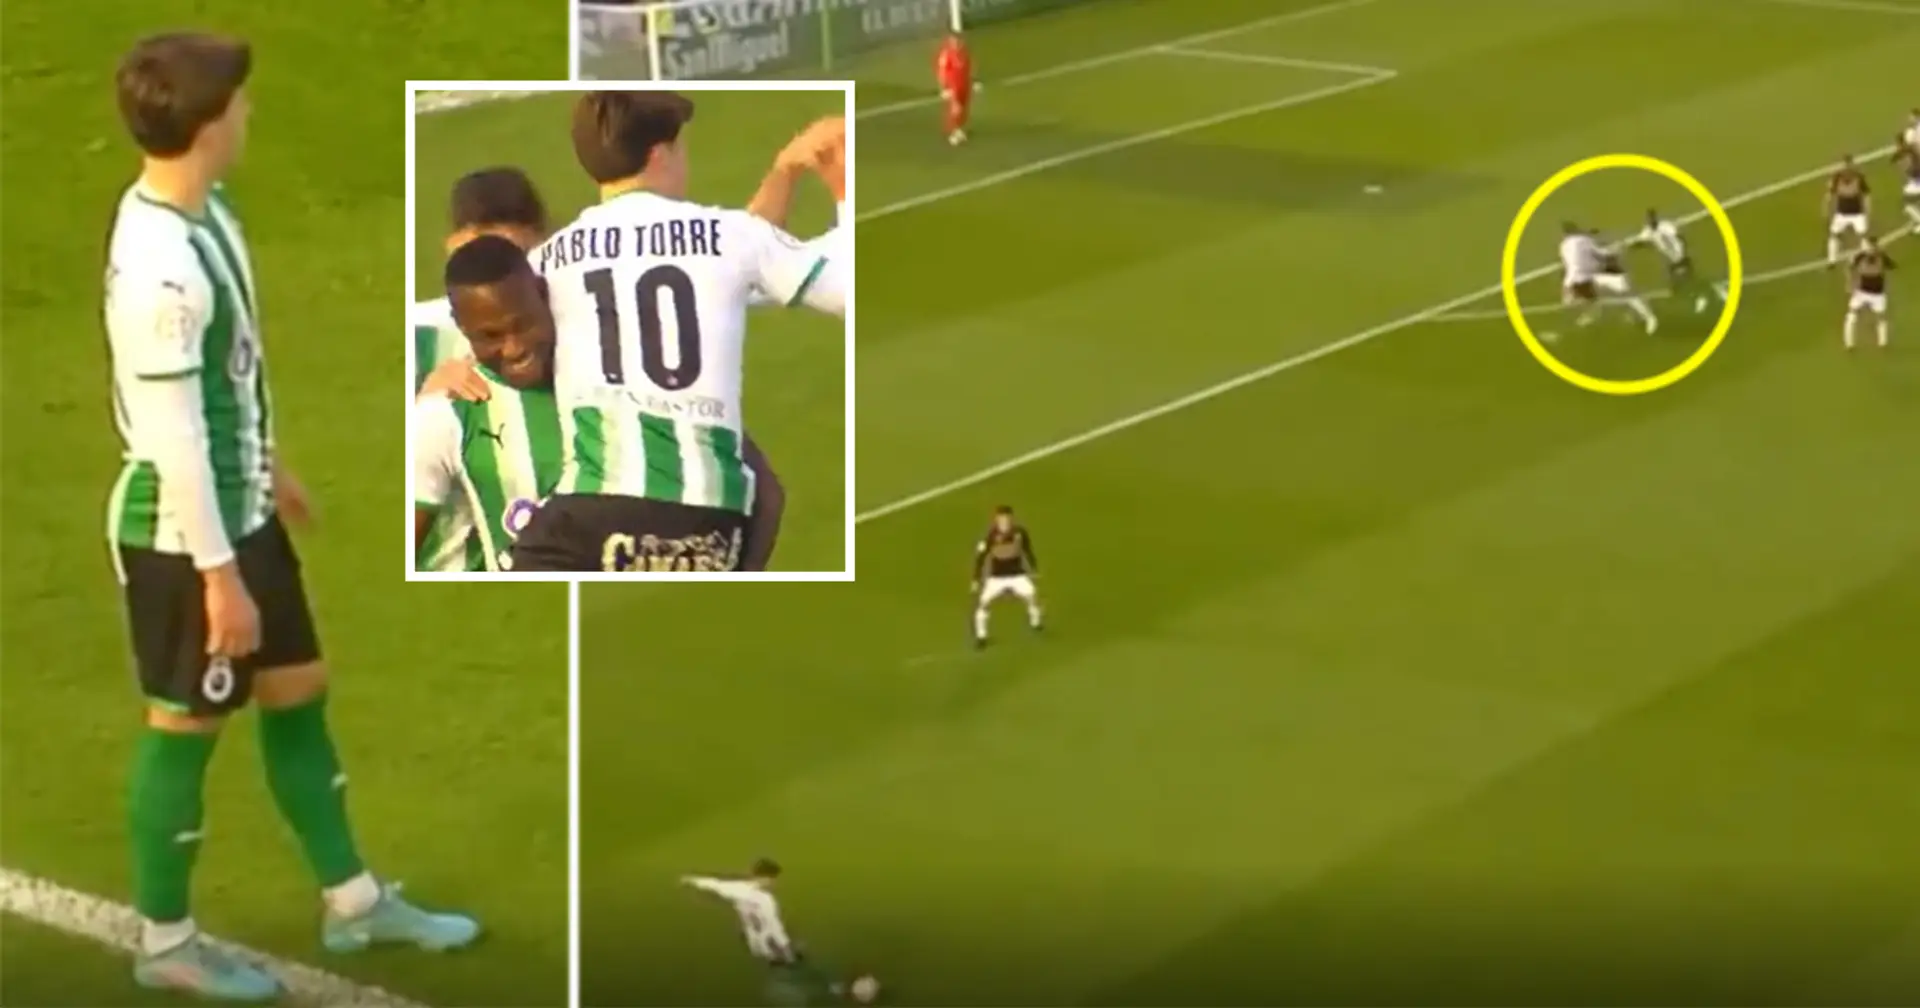 Barca's new signing Pablo Torre smartly assists from free kick